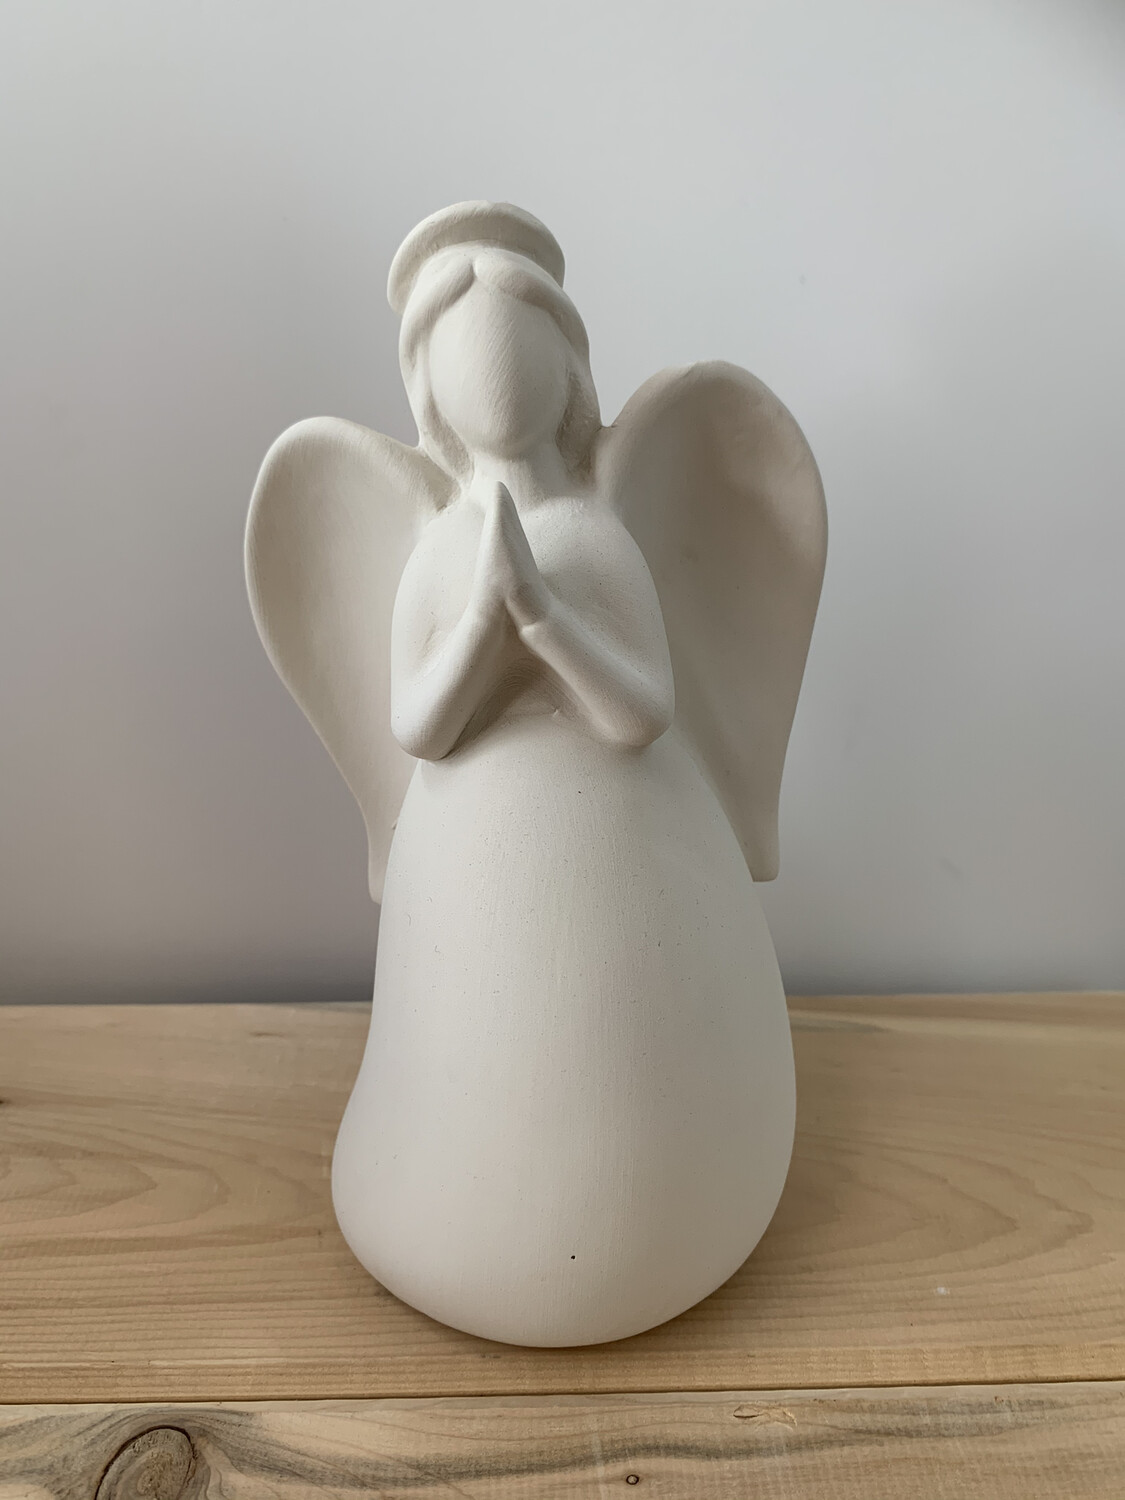 Paint Your Own Pottery - Ceramic
Angel Figurine Painting Kit